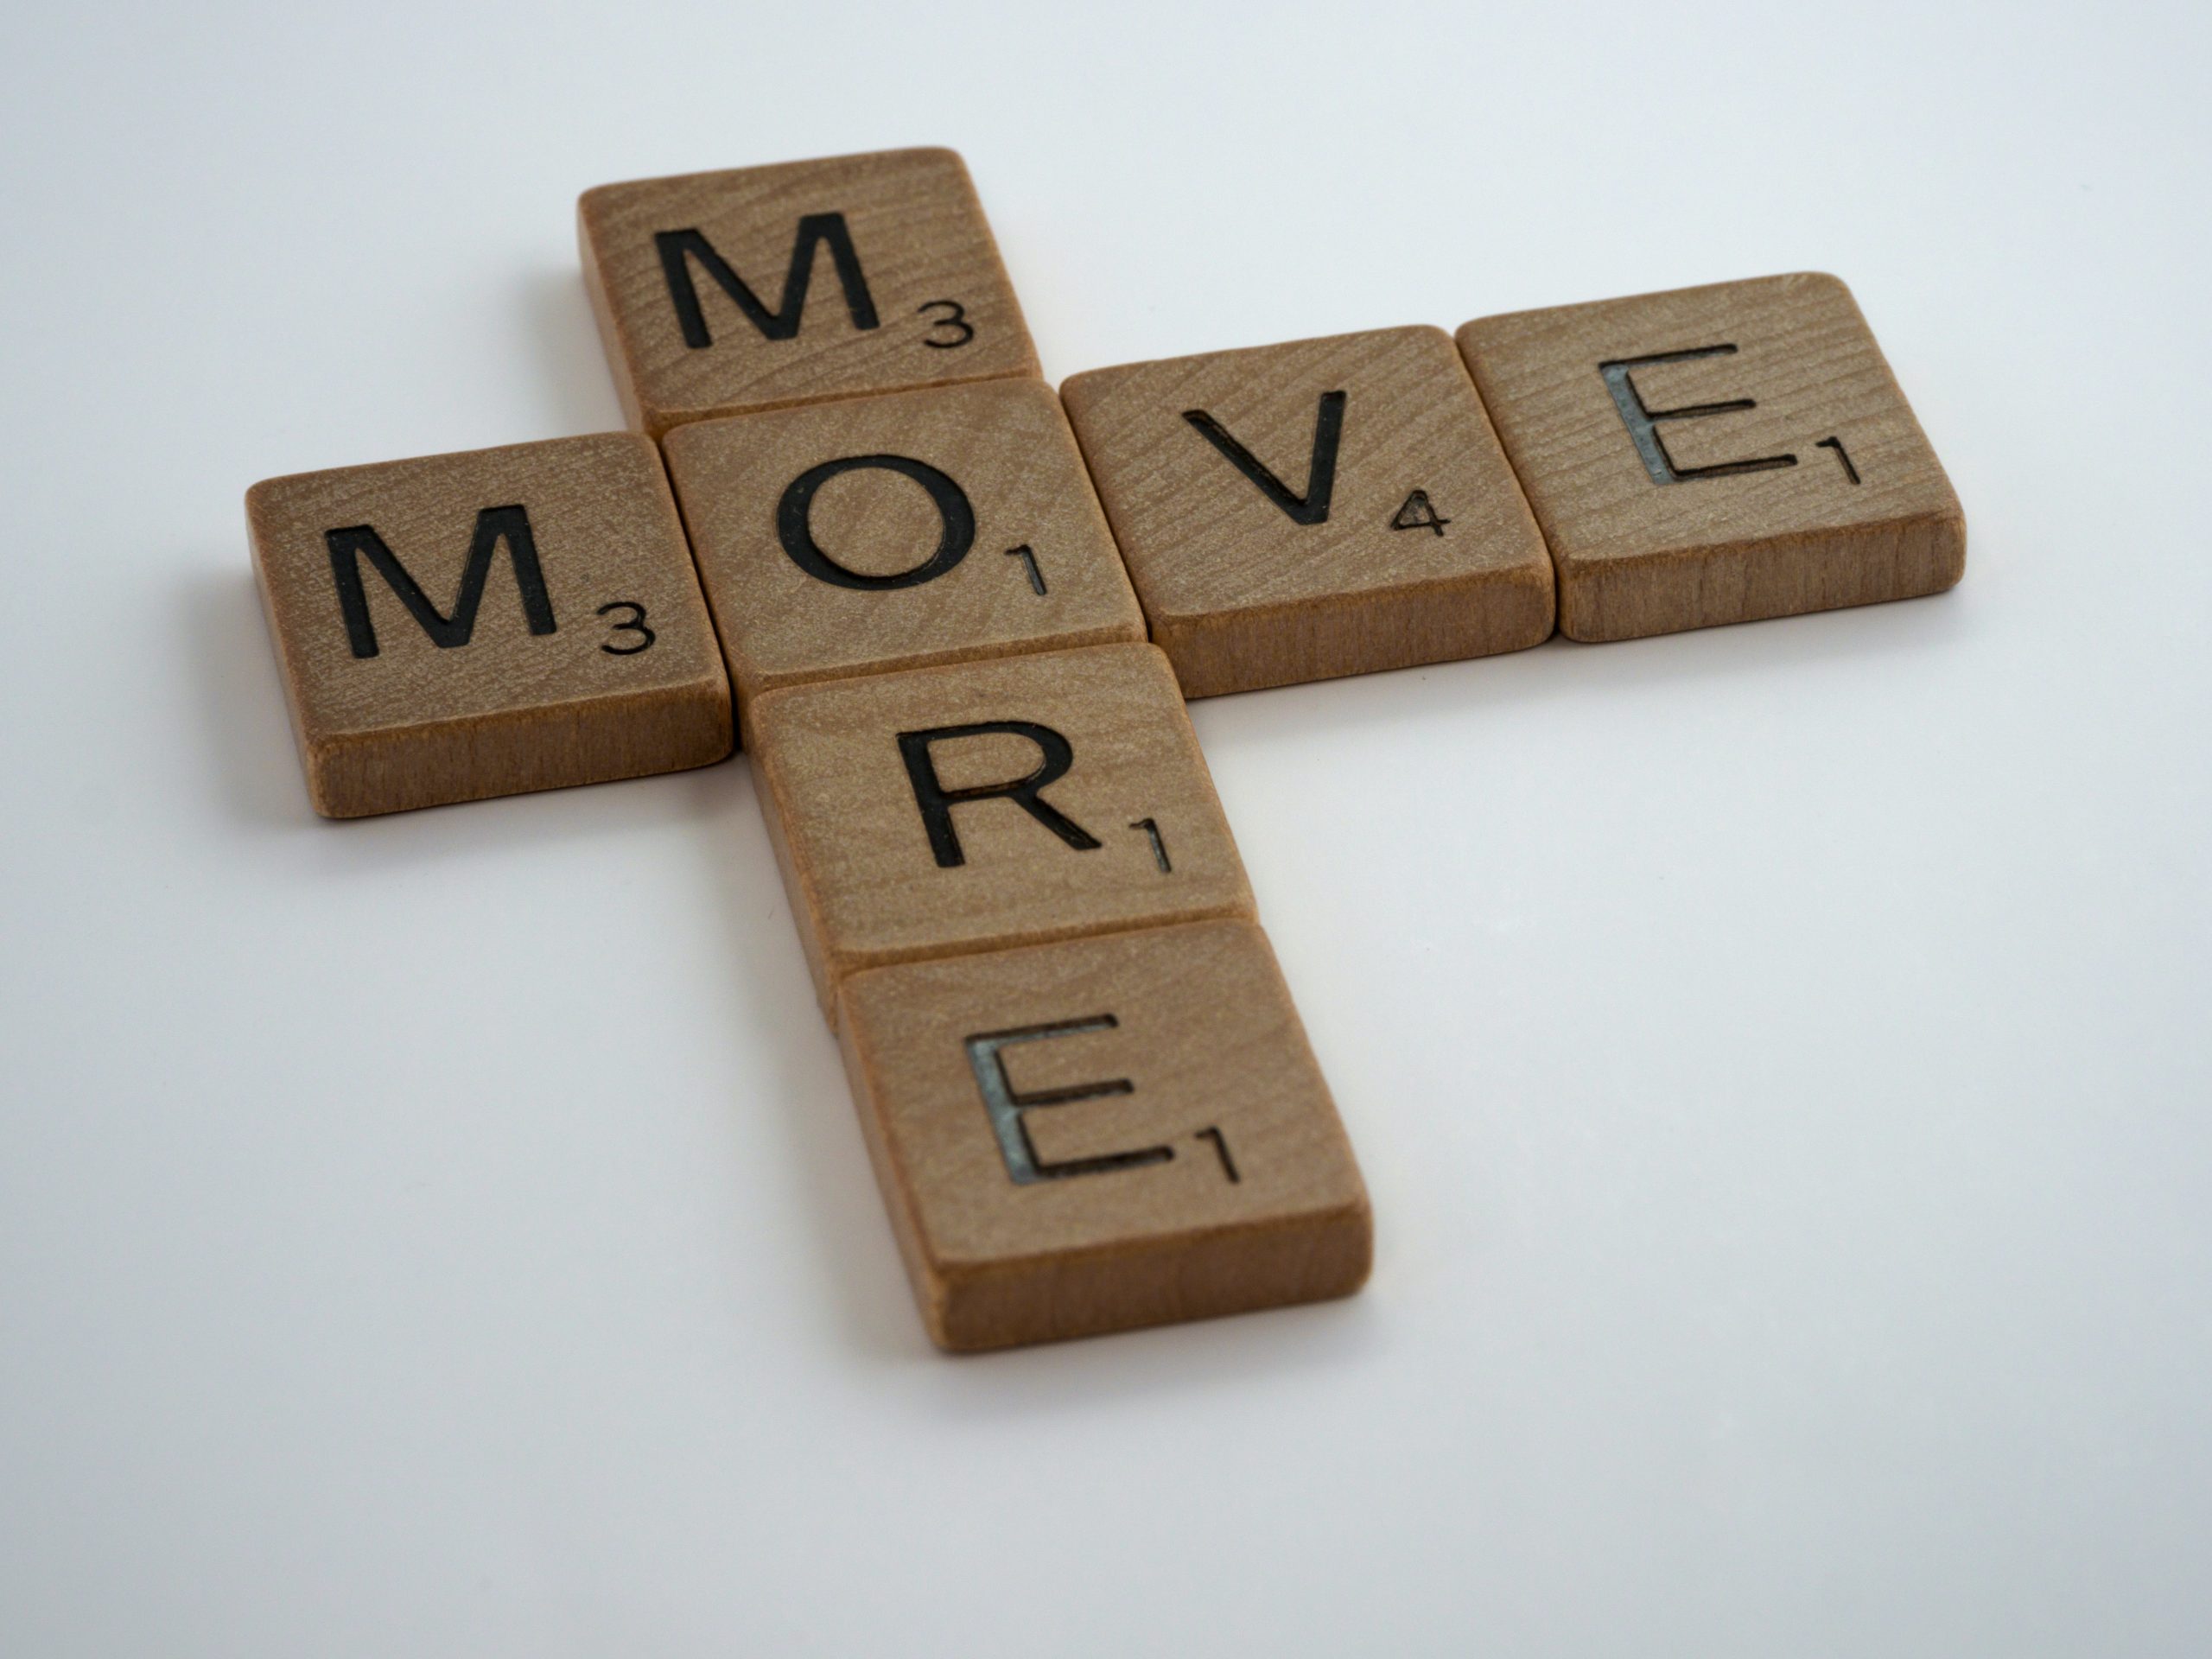 Moving our mood while staying at home – a short movement sequence (Video)